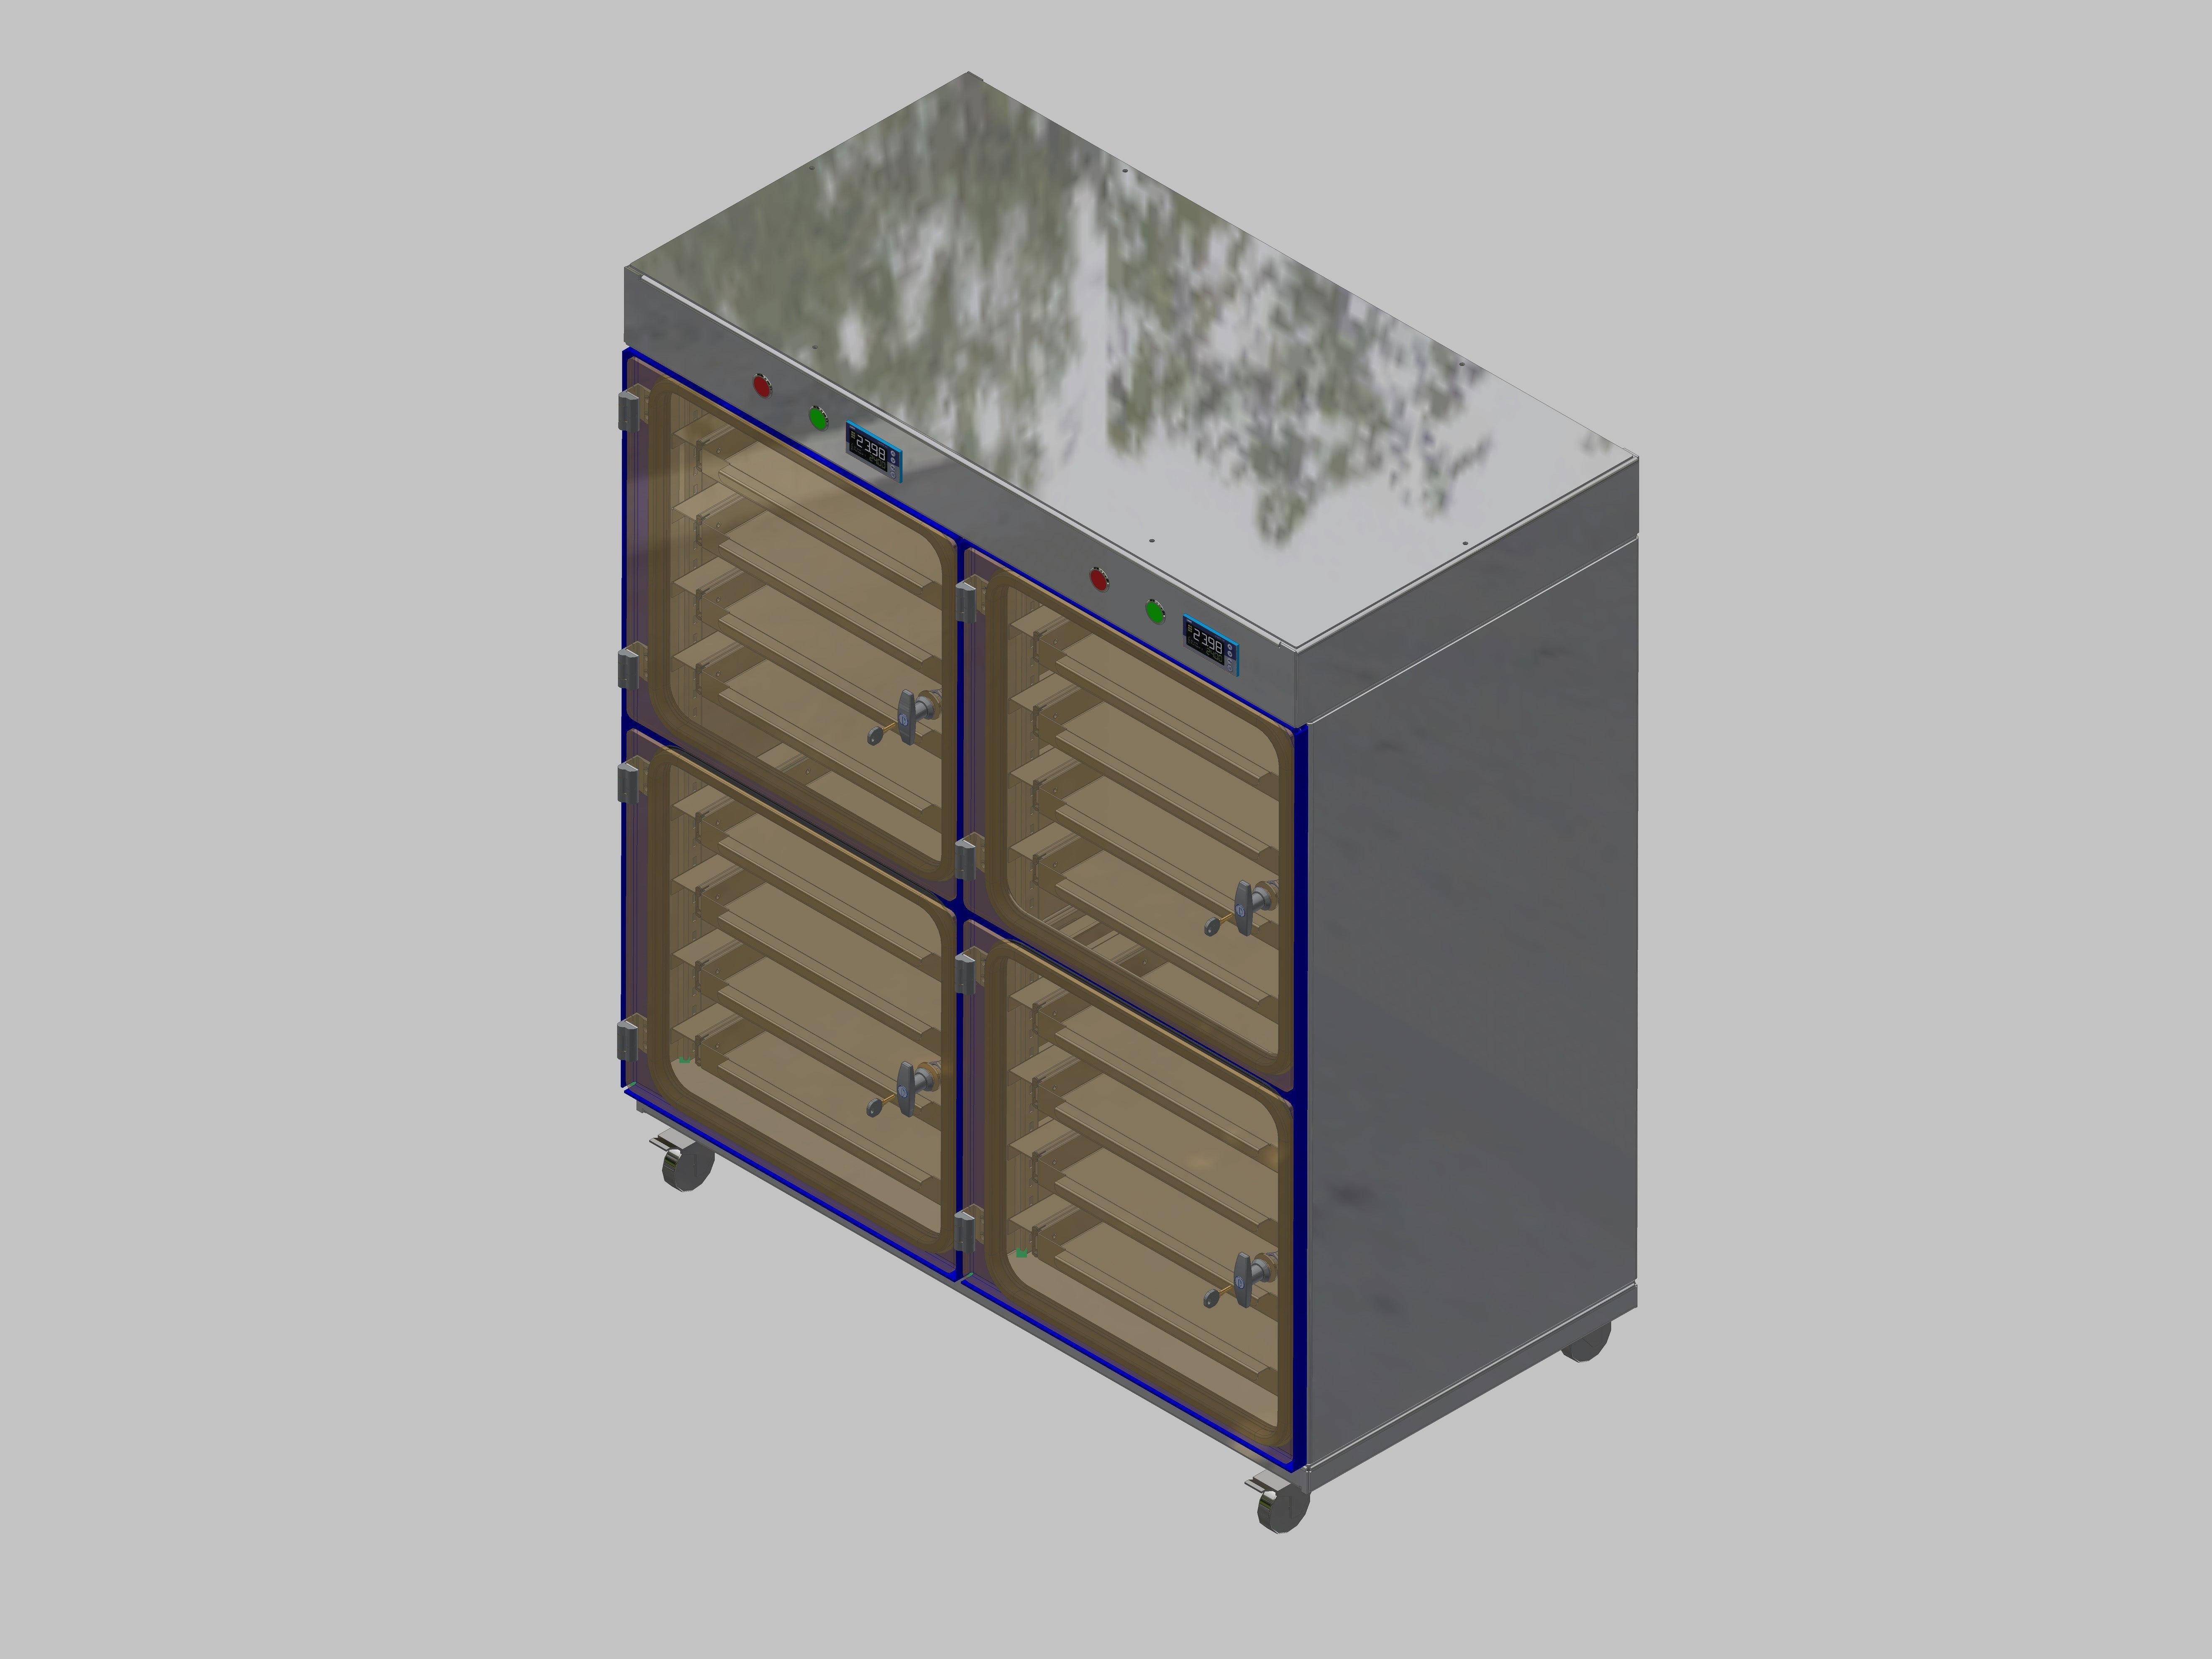 Dry storage cabinet-ITN-1200-4 with 4 drawers per compartment and base design with wheels